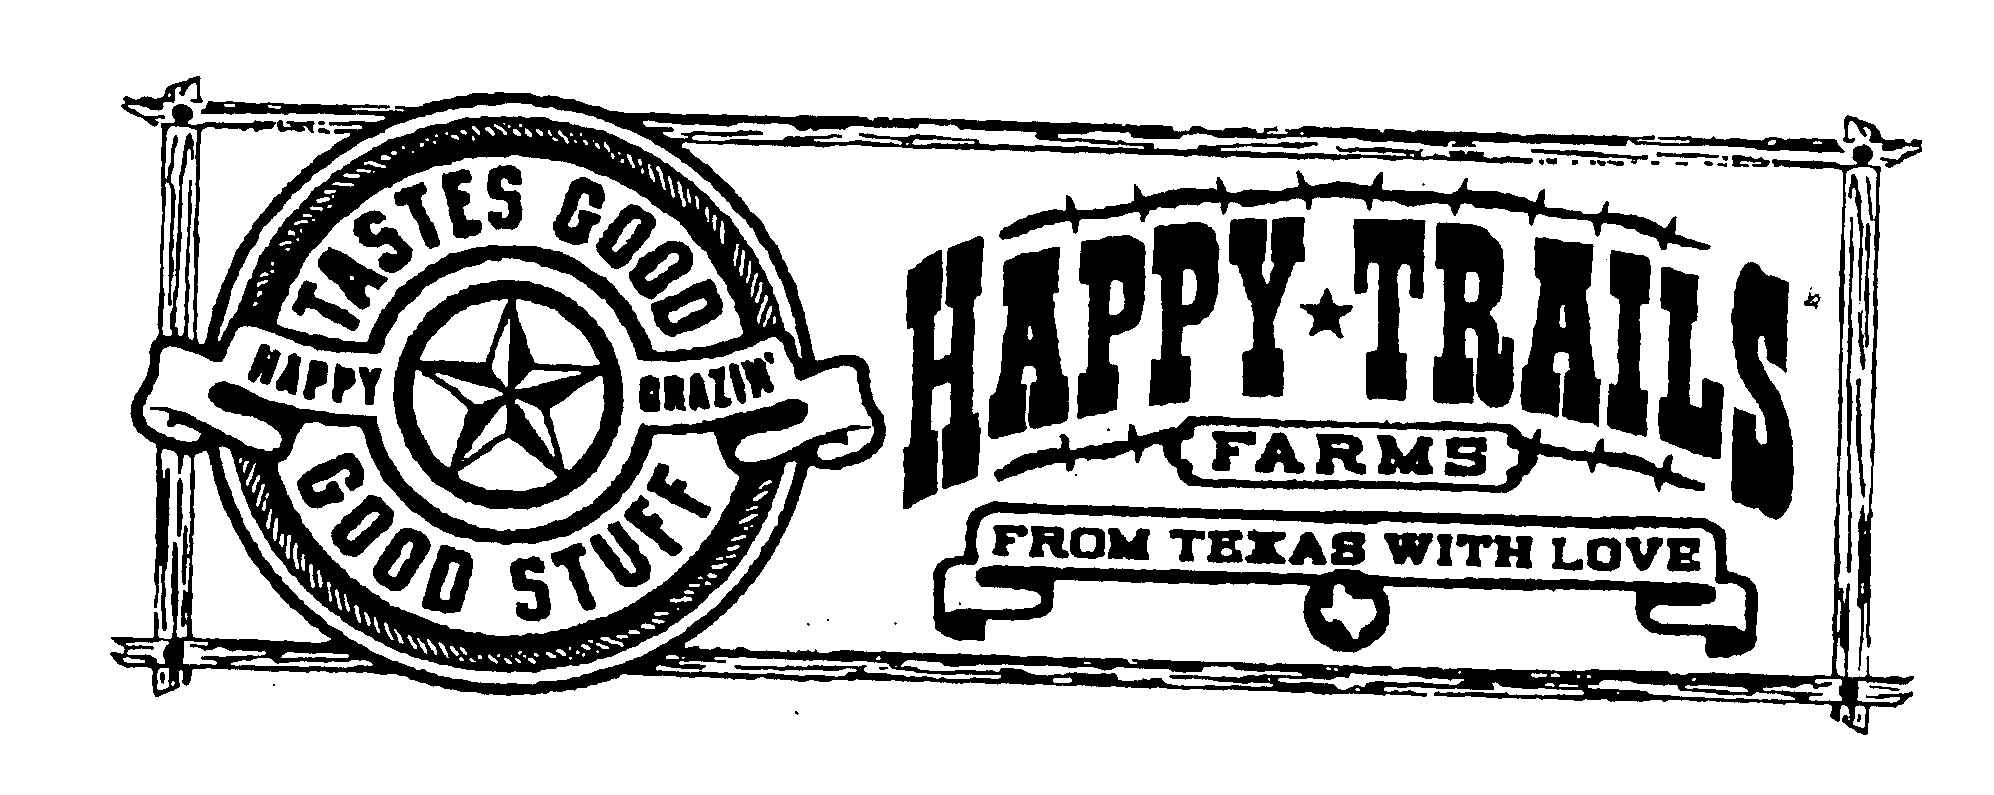  HAPPY TRAILS FARMS FROM TEXAS WITH LOVE TASTES GOOD GOOD STUFF HAPPY GRAZIN'